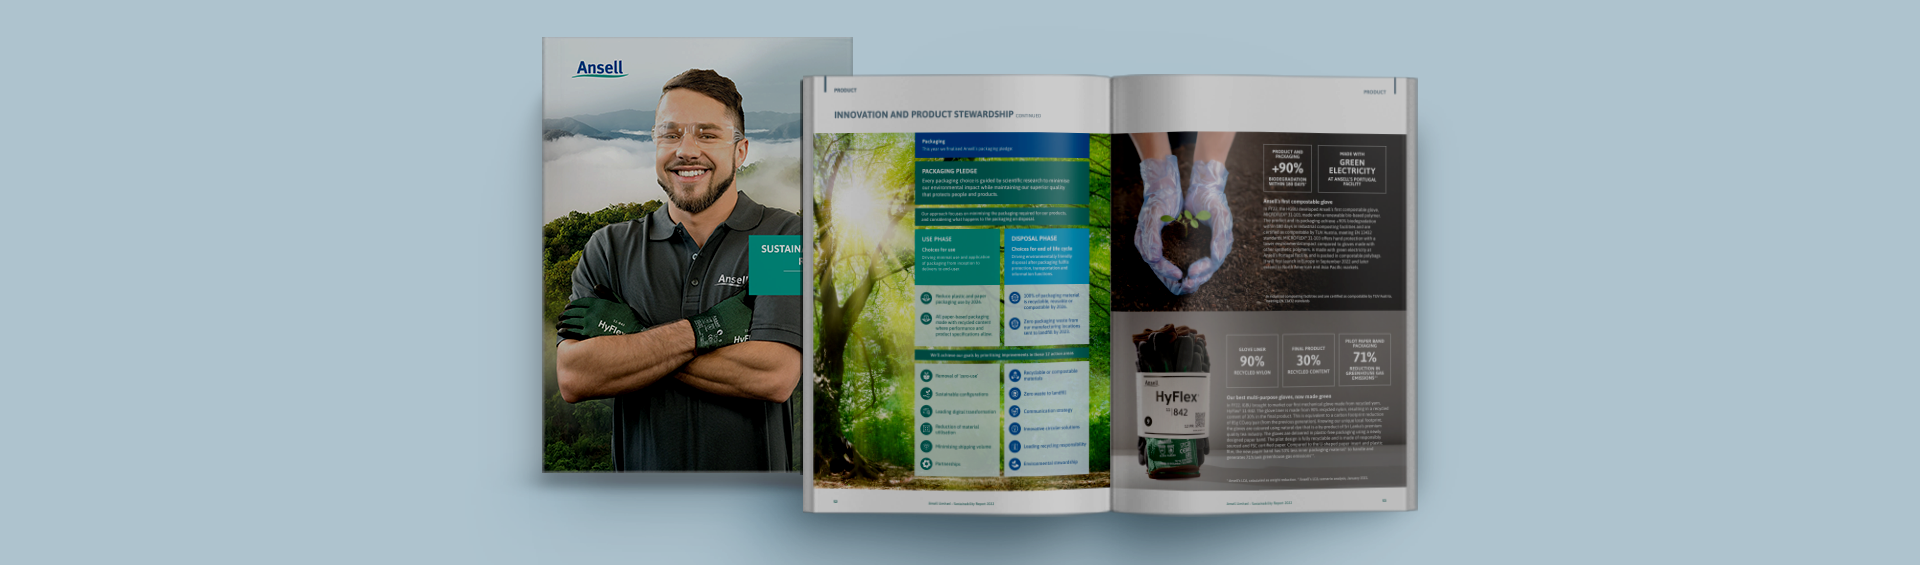 Open pages of the Ansell Sustainability Report 2022 against a greyish blue background, showing a man with arms folded, a tree, text and images.